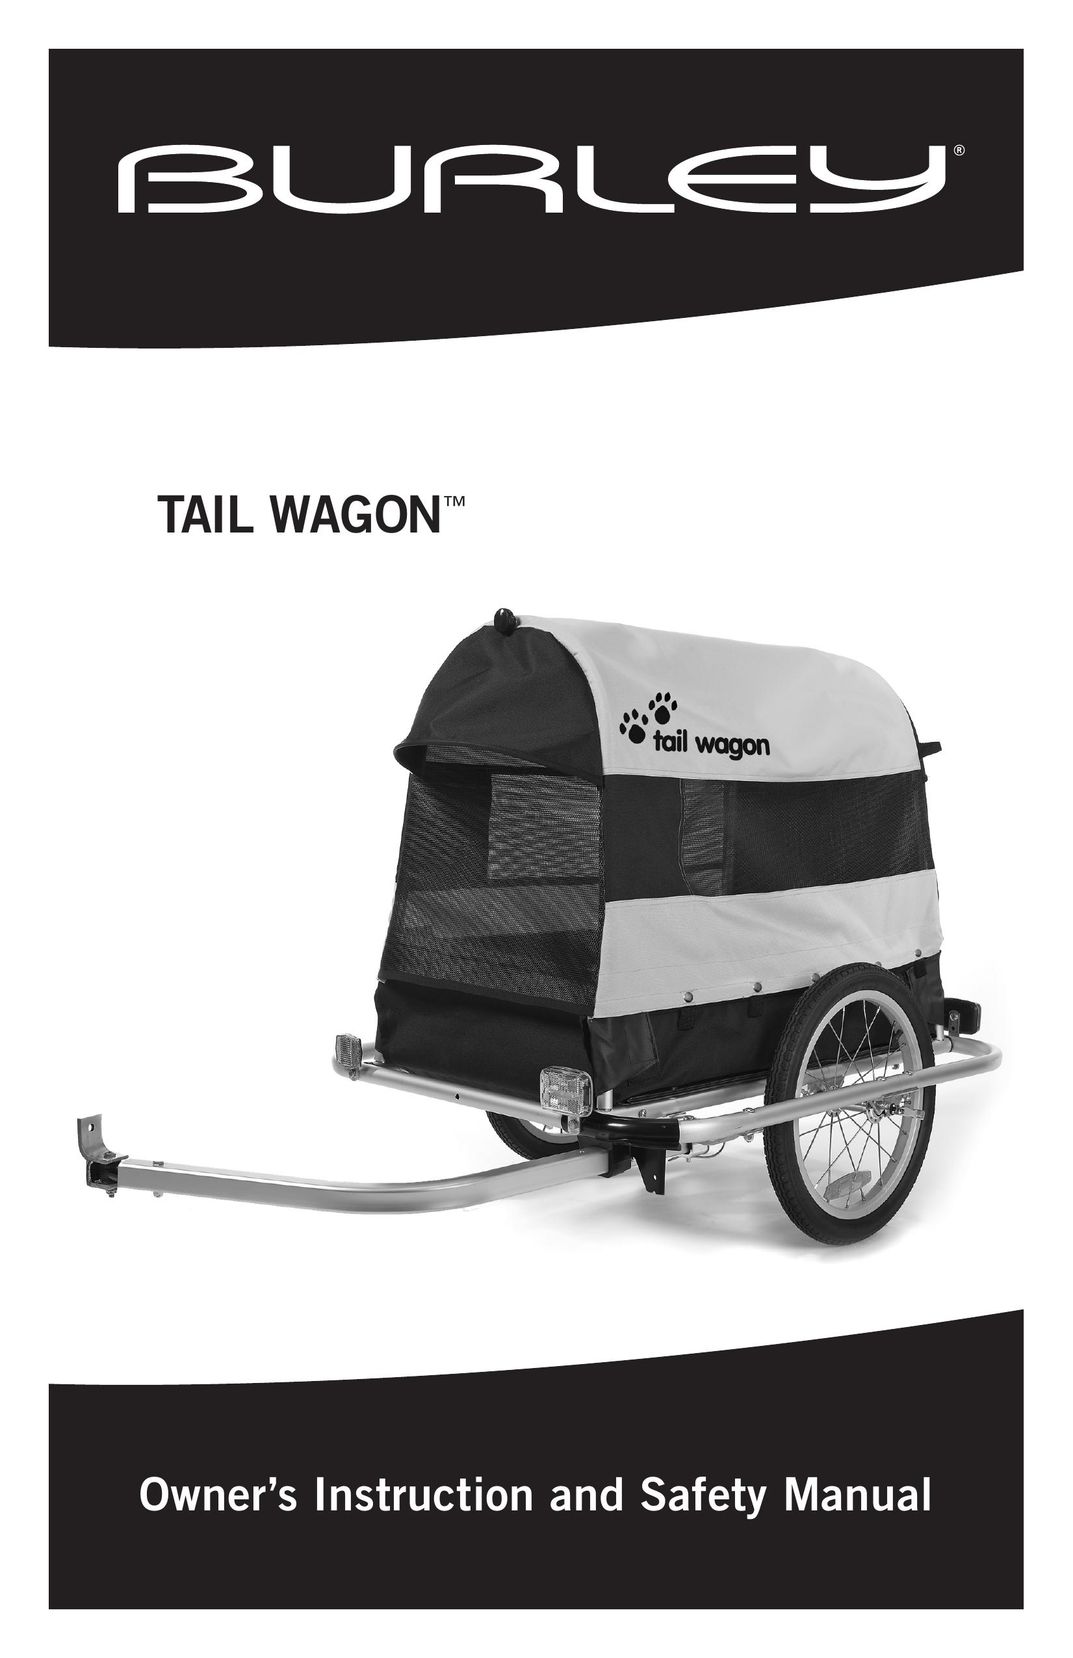 Burley Tail Wagon Riding Toy User Manual (Page 1)